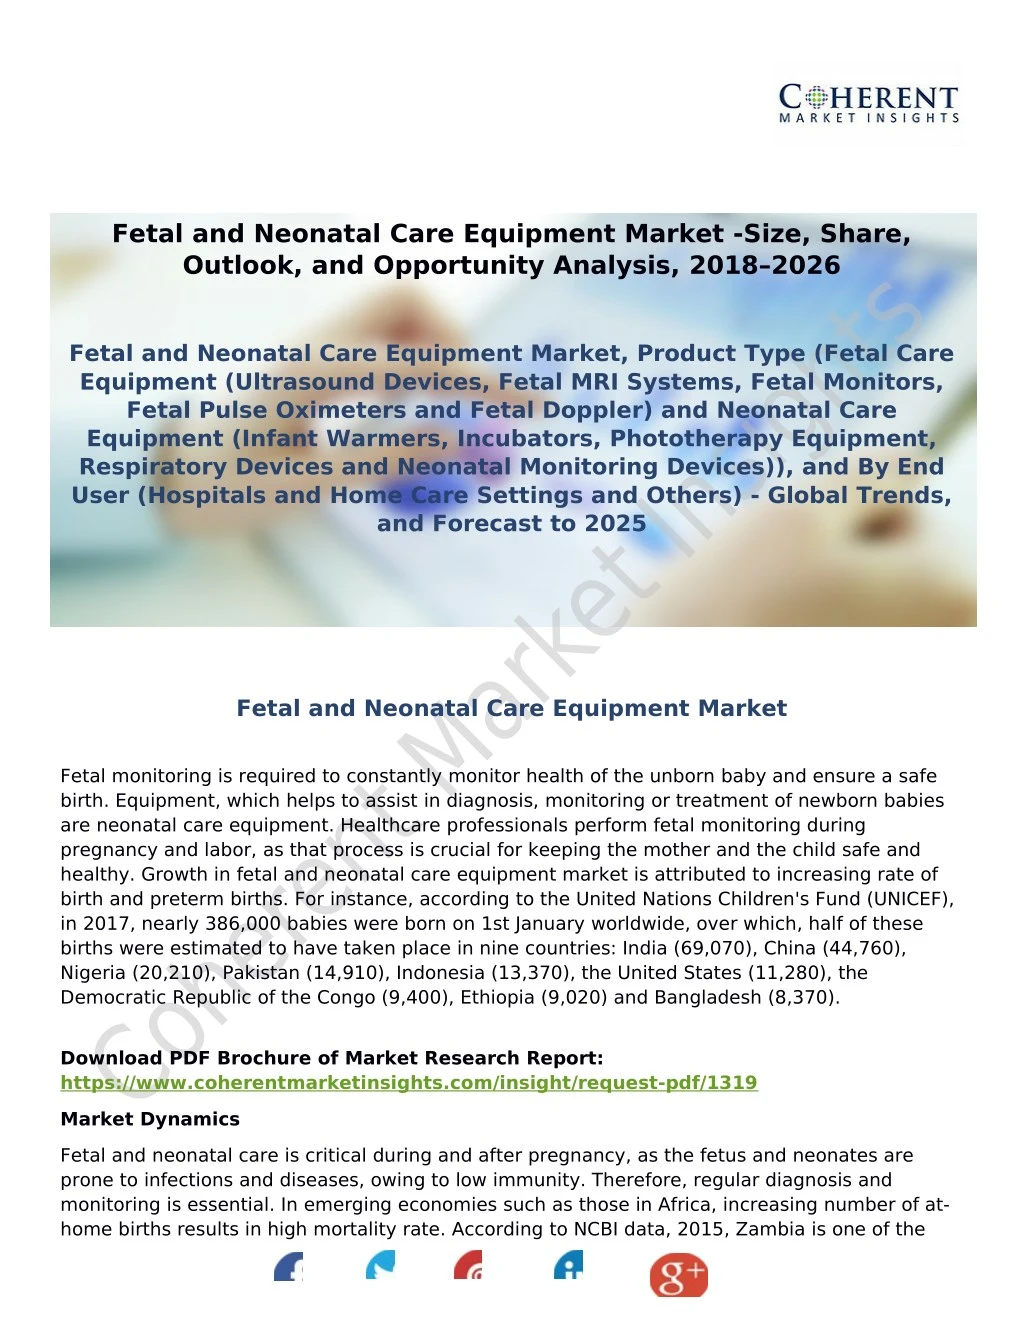 fetal and neonatal care equipment market size